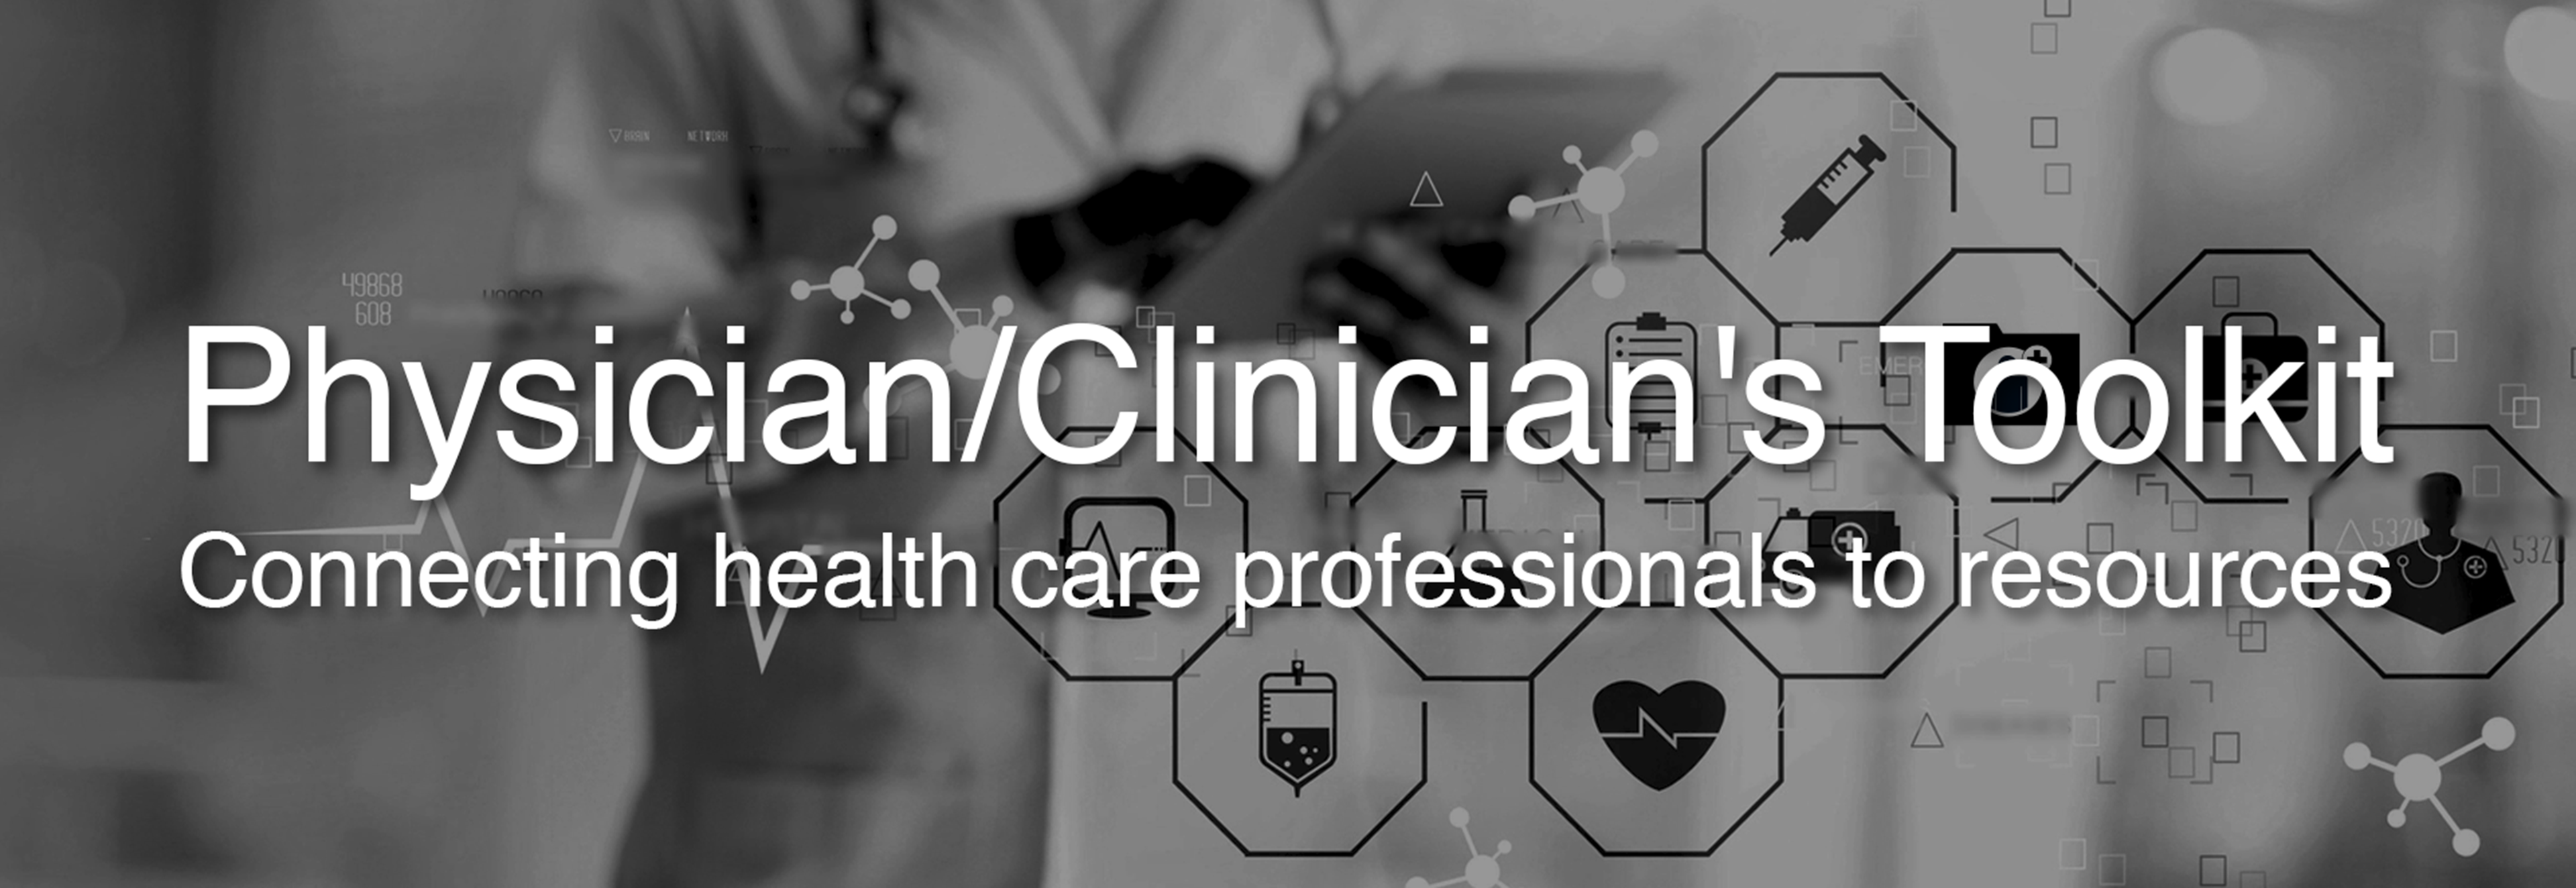 Physician/Clinician's Toolkit | Connecting health care professionals to resources